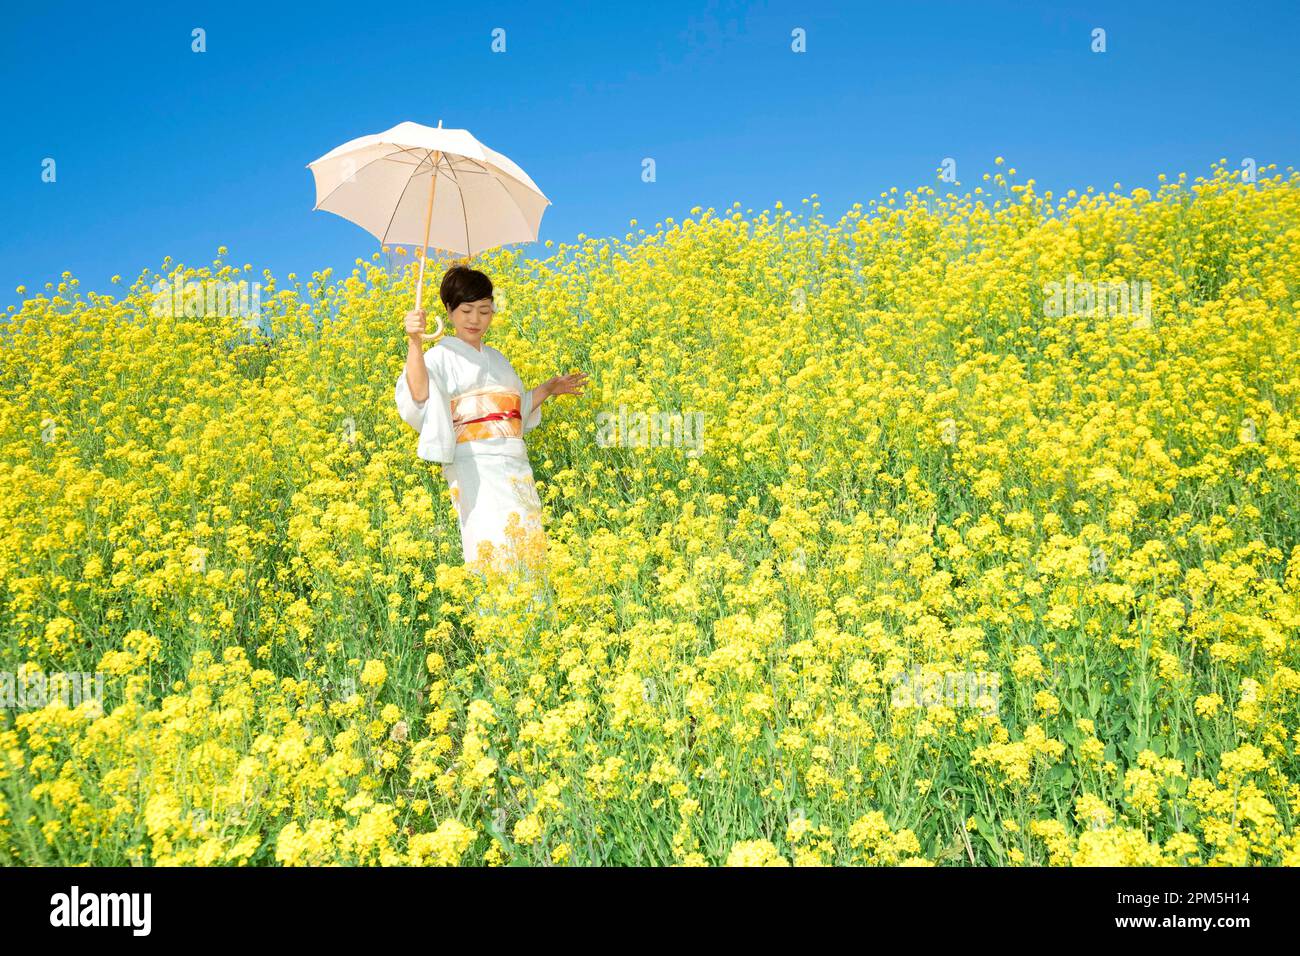 Japanese woman in a beautiful yellow flowers field Stock Photo